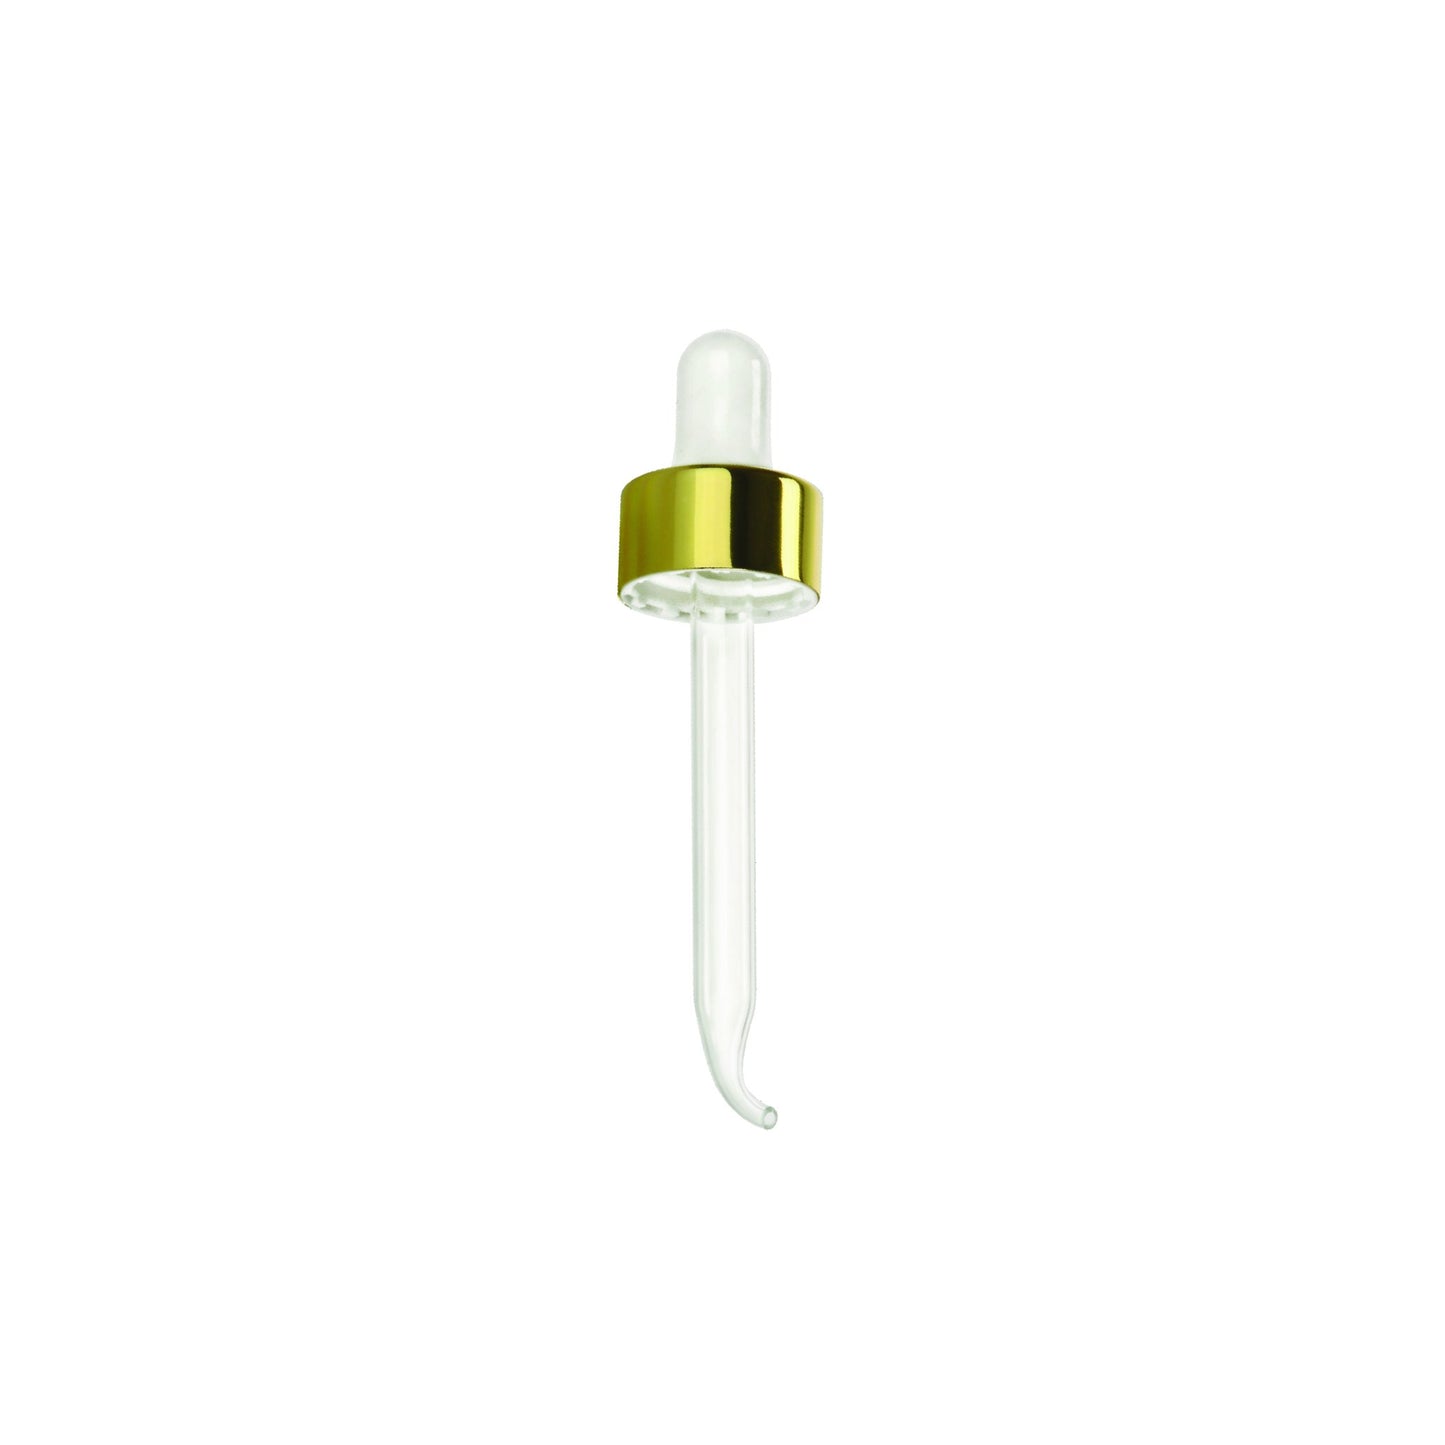 (1 oz) Gold 20-400 Dropper with 70 mm Bent Glass Pipette